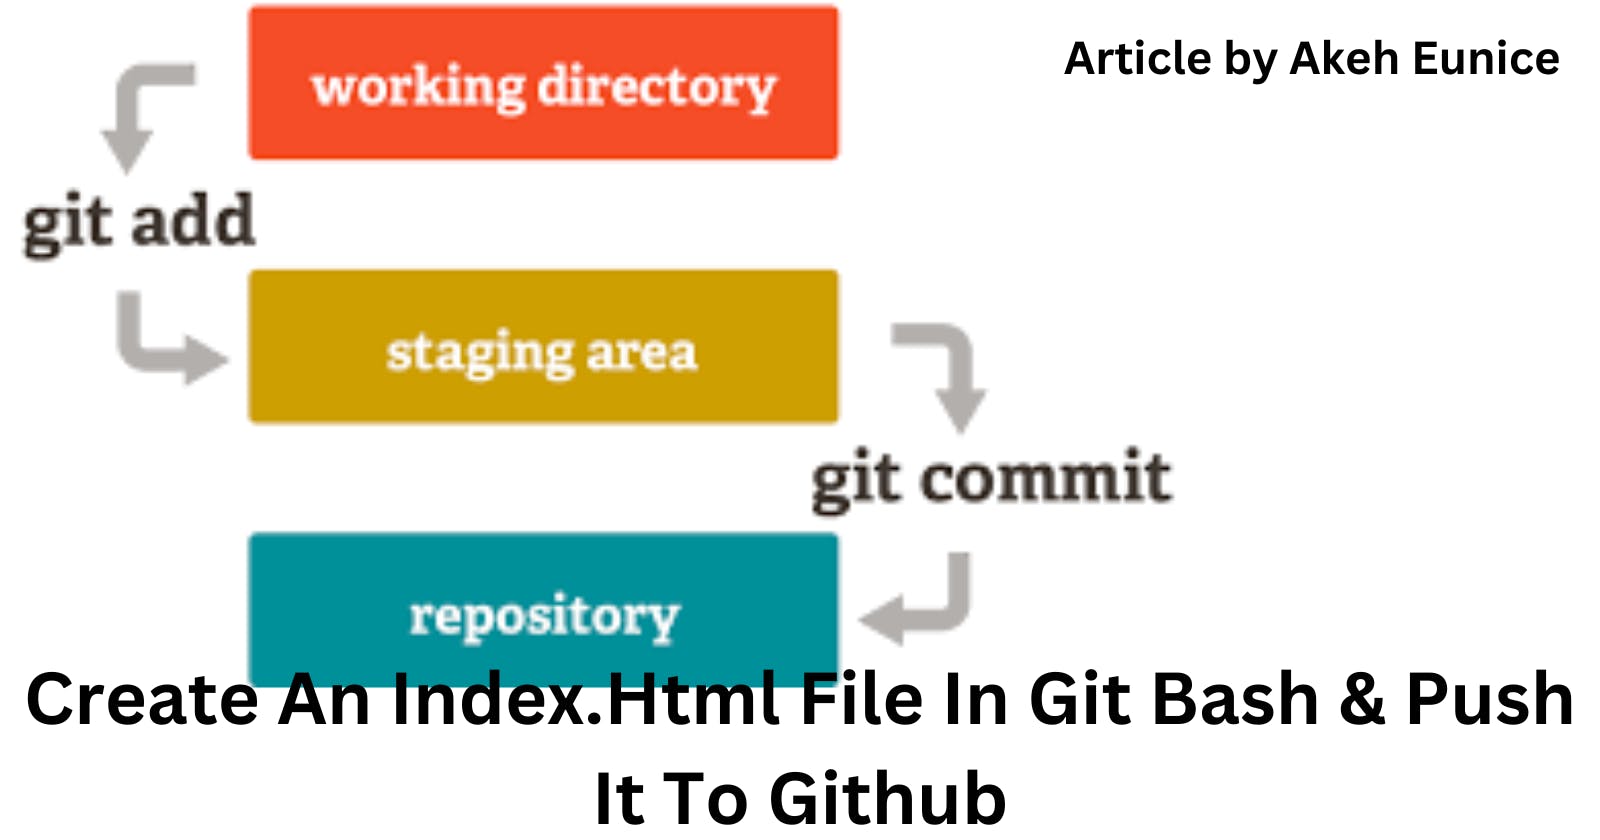 Create An Index.Html File In Git Bash & Push It To Github